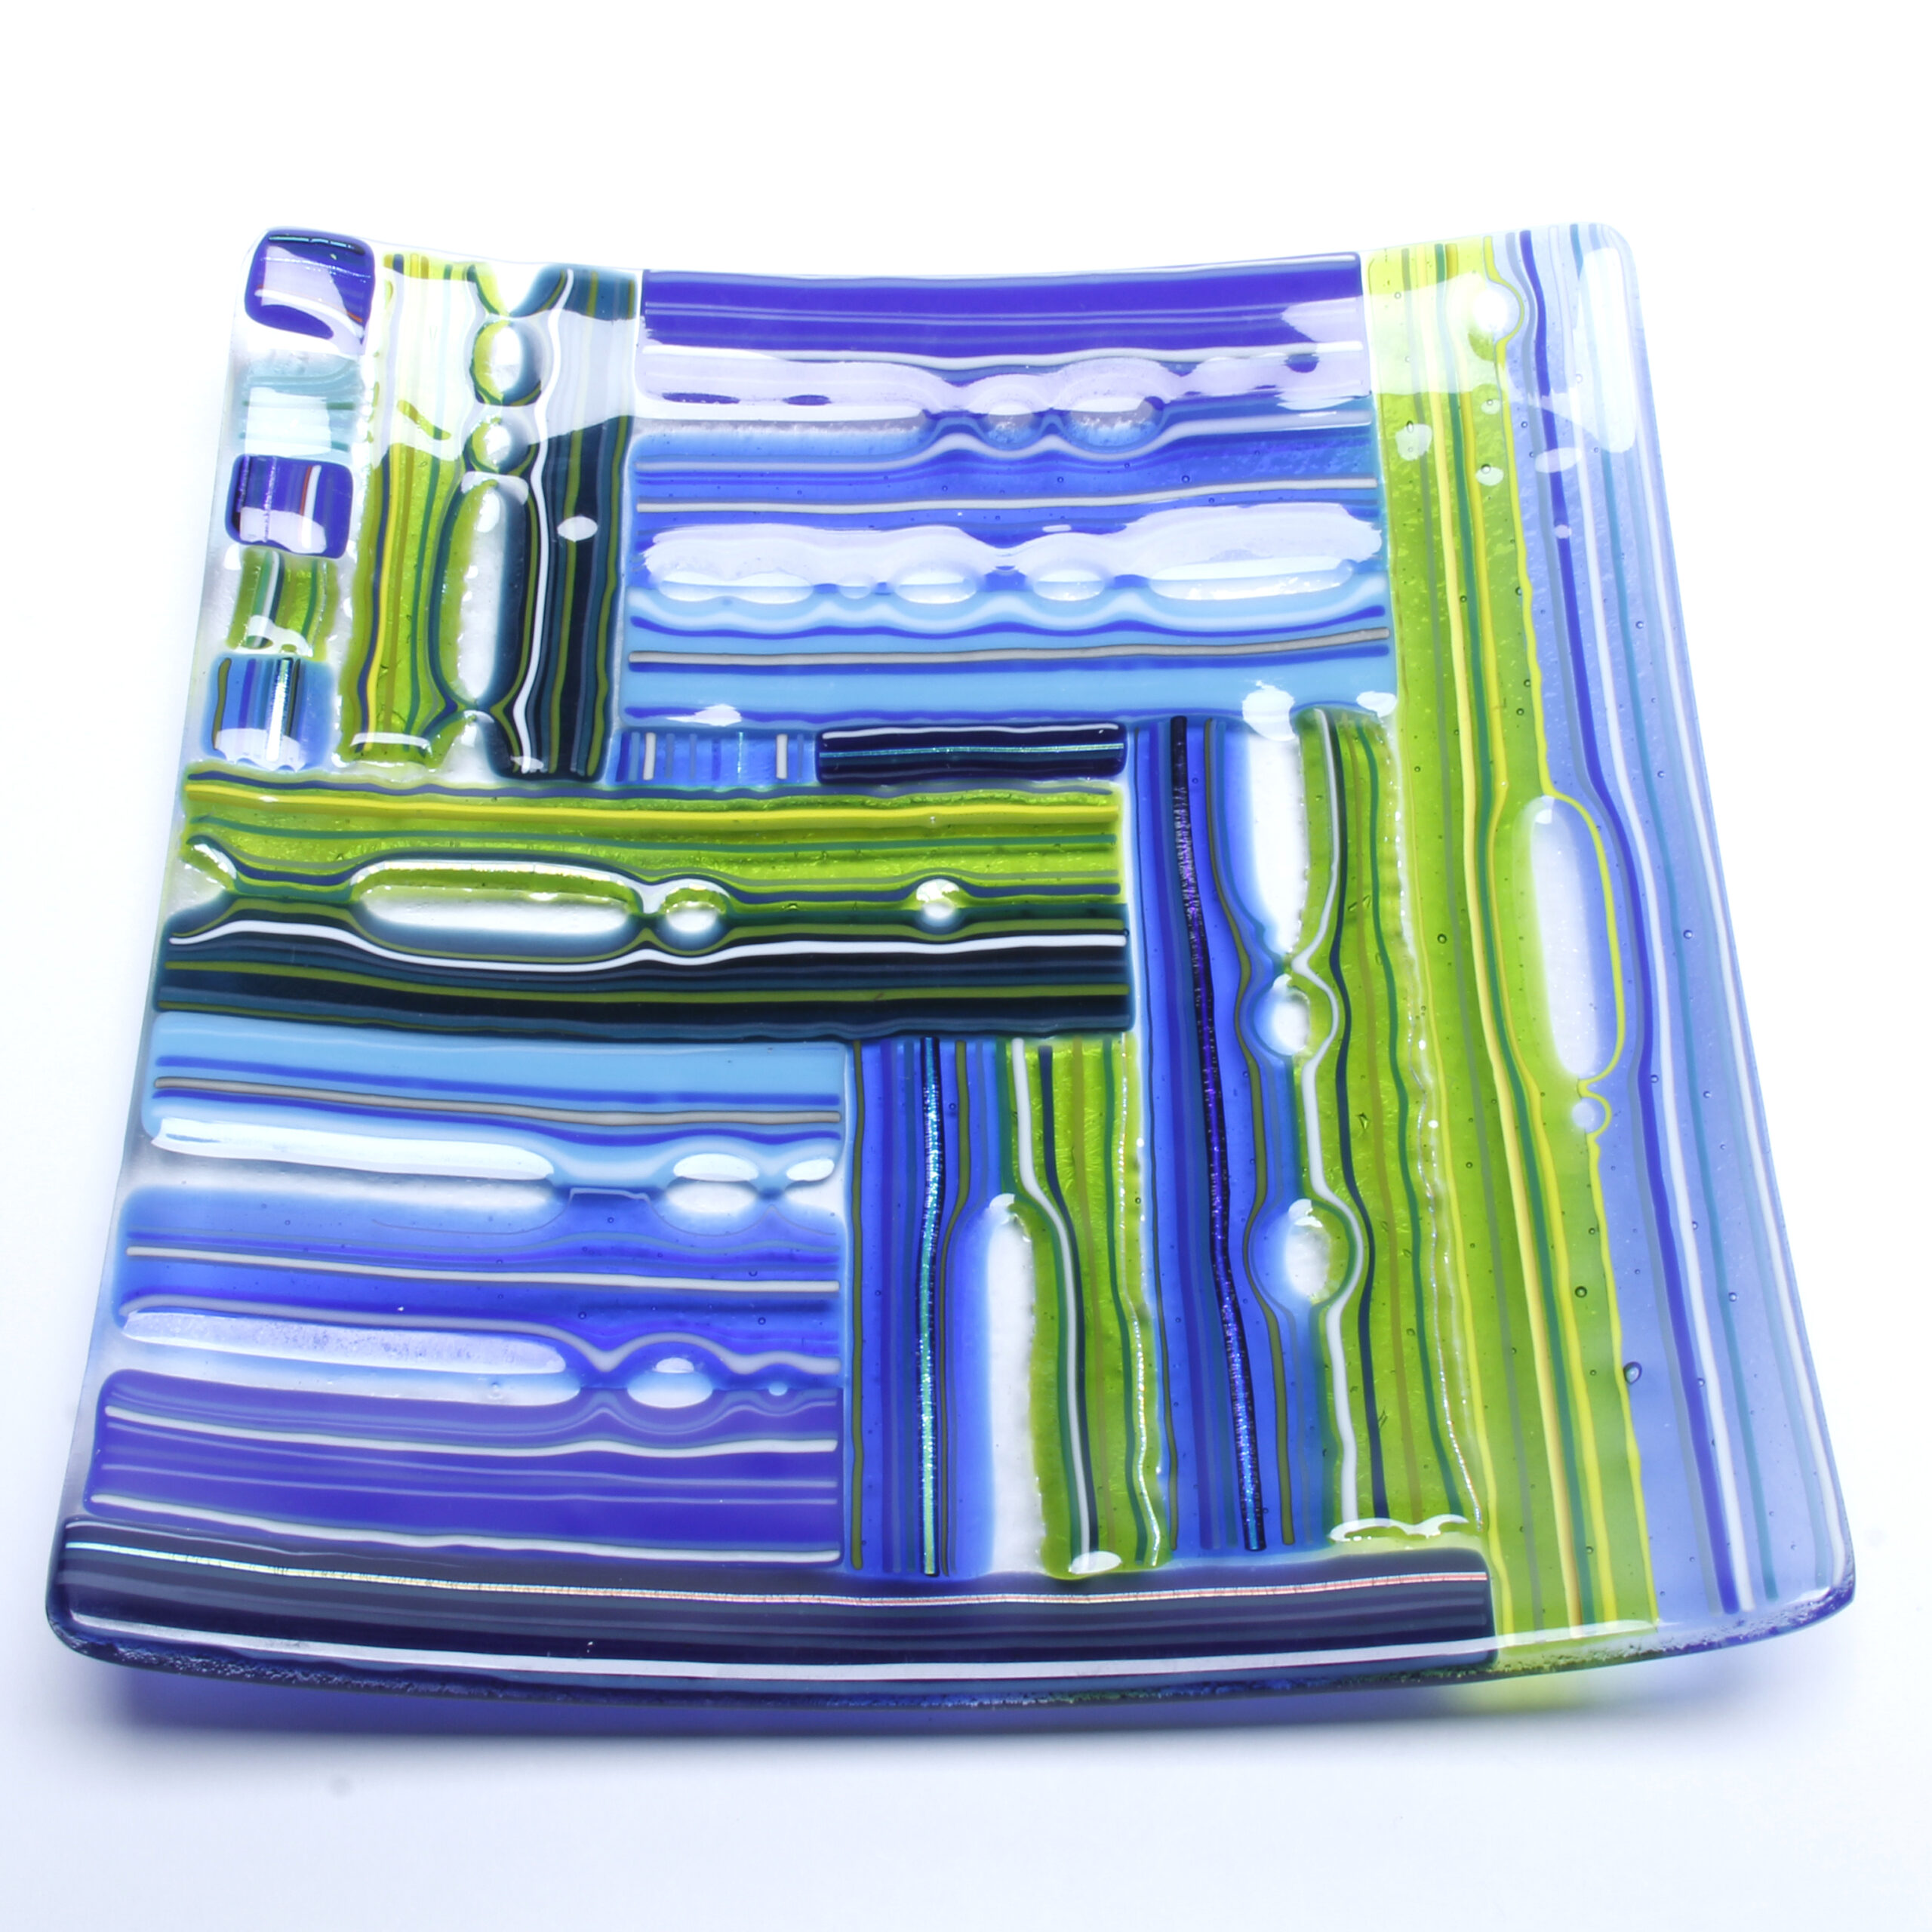 Trio Design Glassware: 10 inch Candy Dish (Each sold separately) Product Image 3 of 3